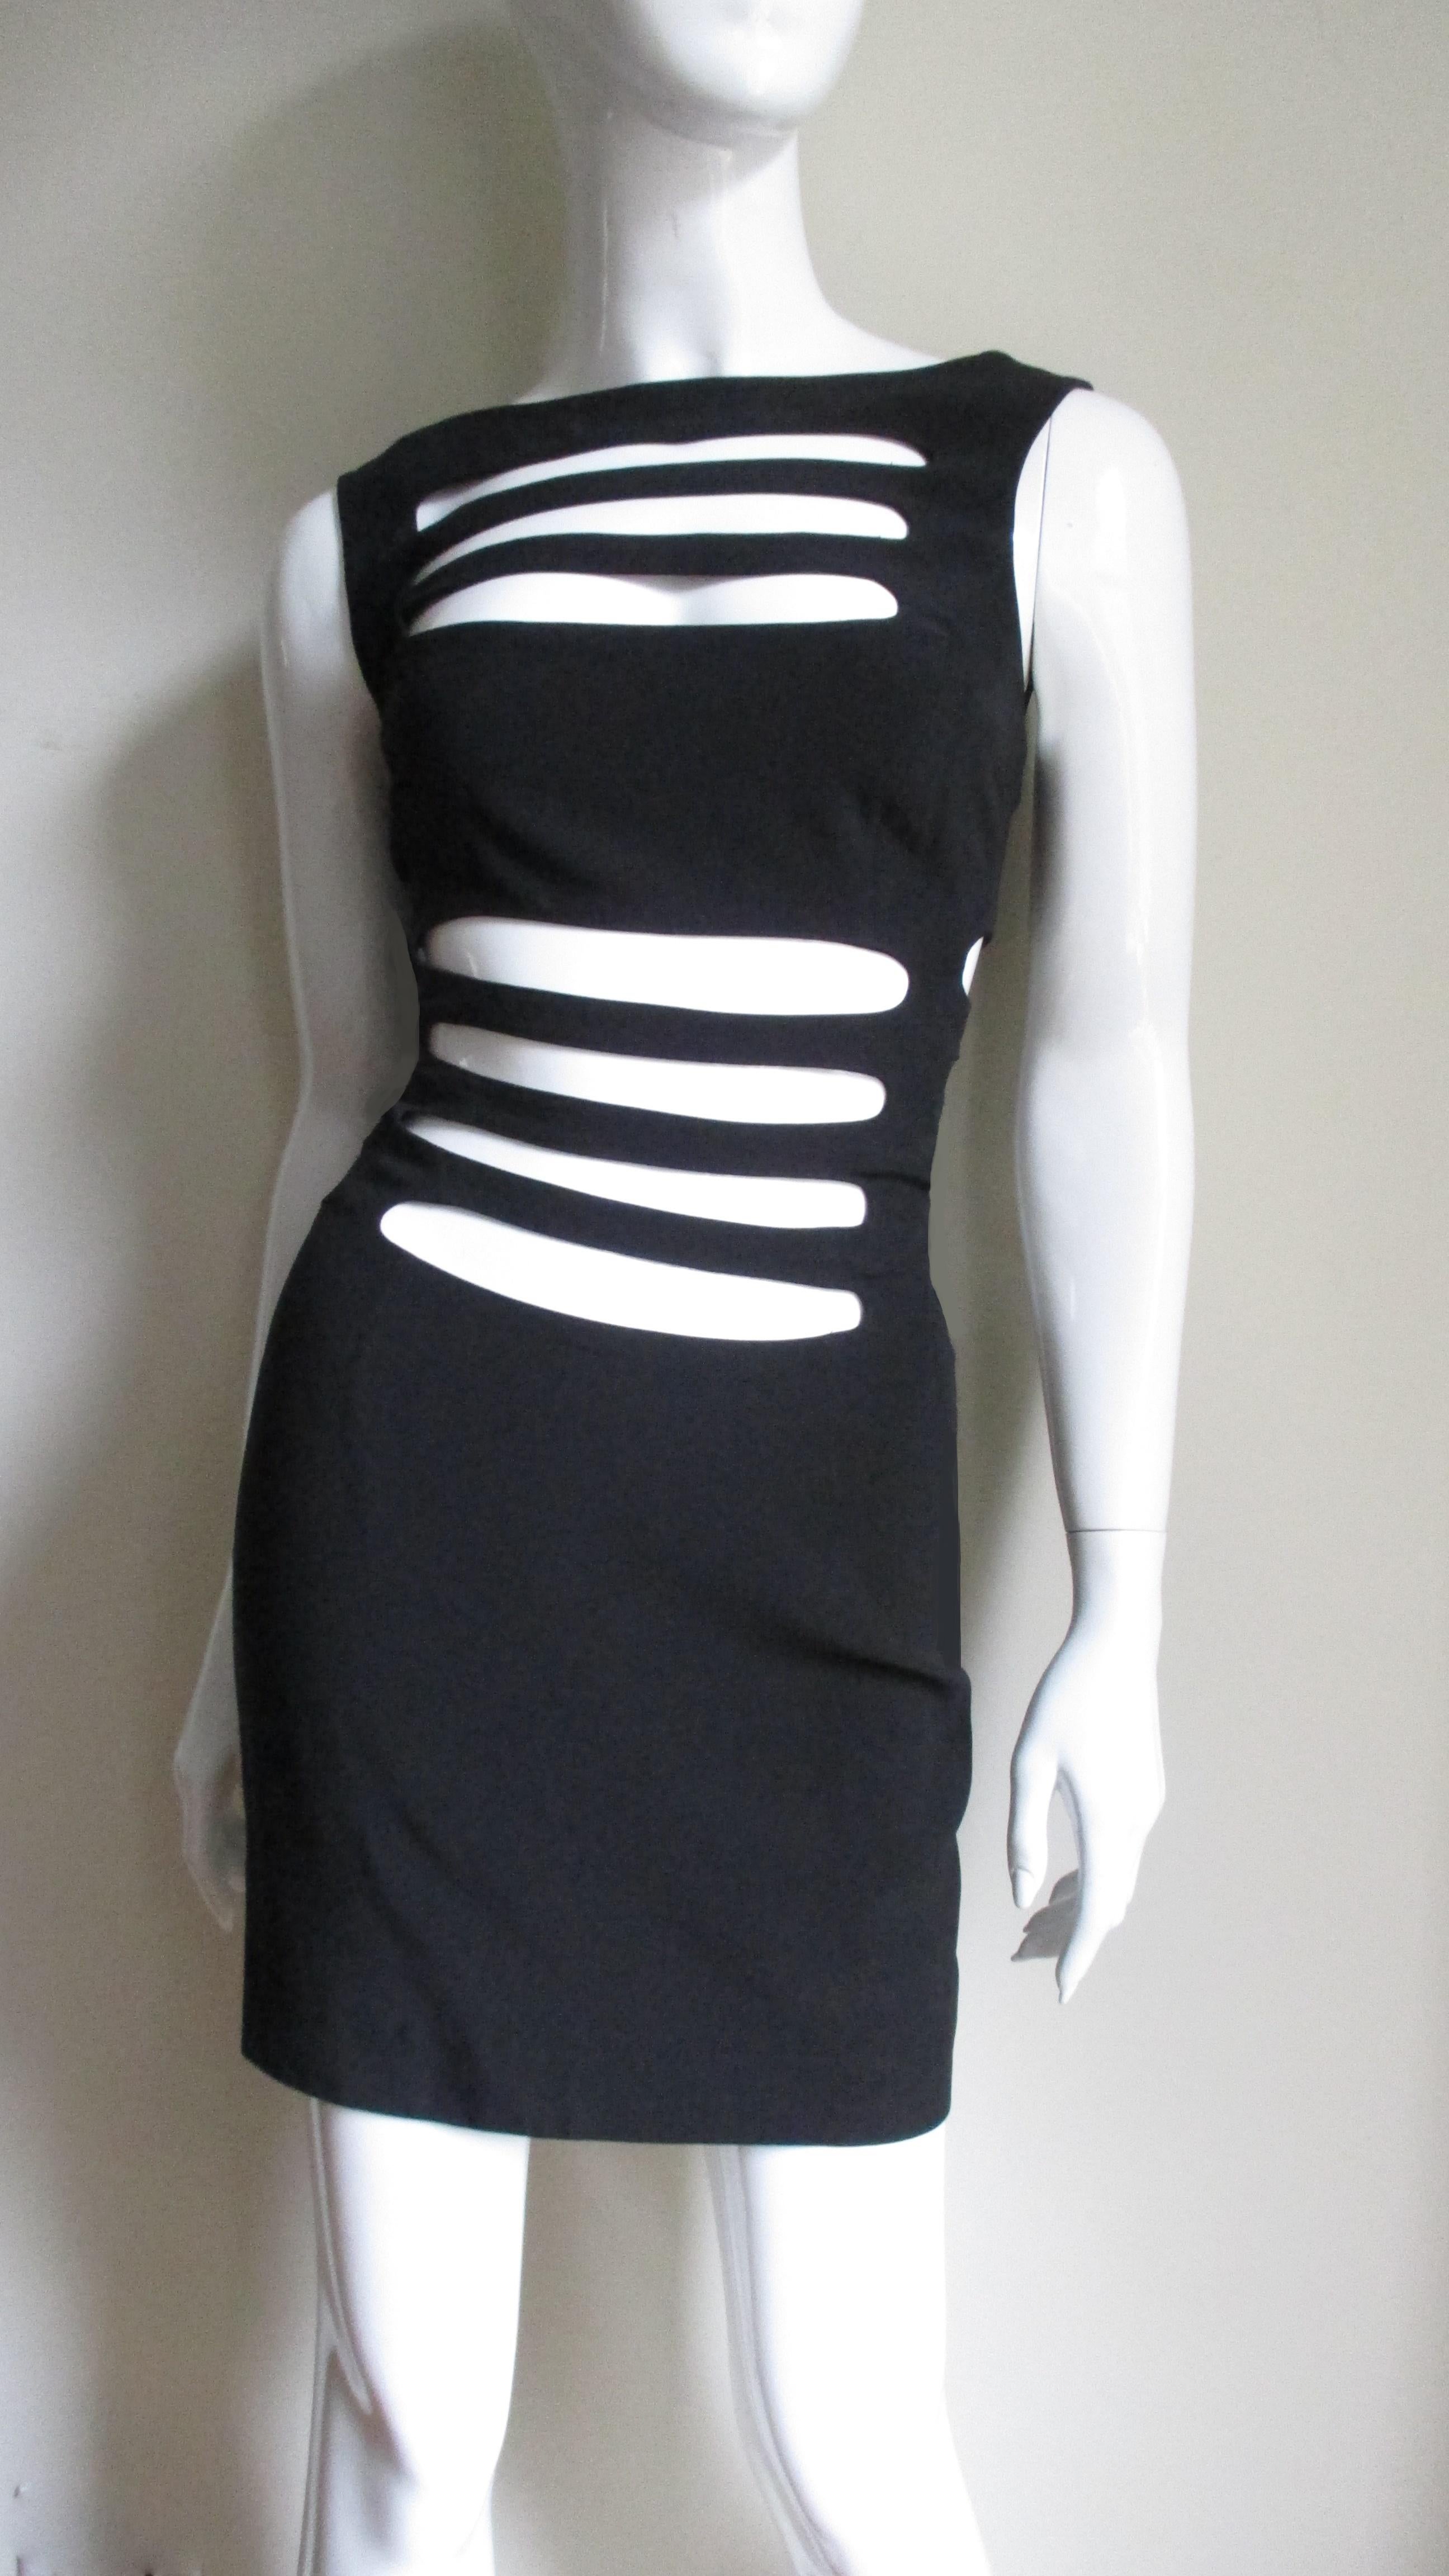 An avant garde black dress from French designer Sophie Sitbon.  It is a simple sleeveless crew neck dress covered in long horizontal cutouts across the midriff, upper chest and sides.  The back has a scoop neckline and has no cutouts.  It is unlined